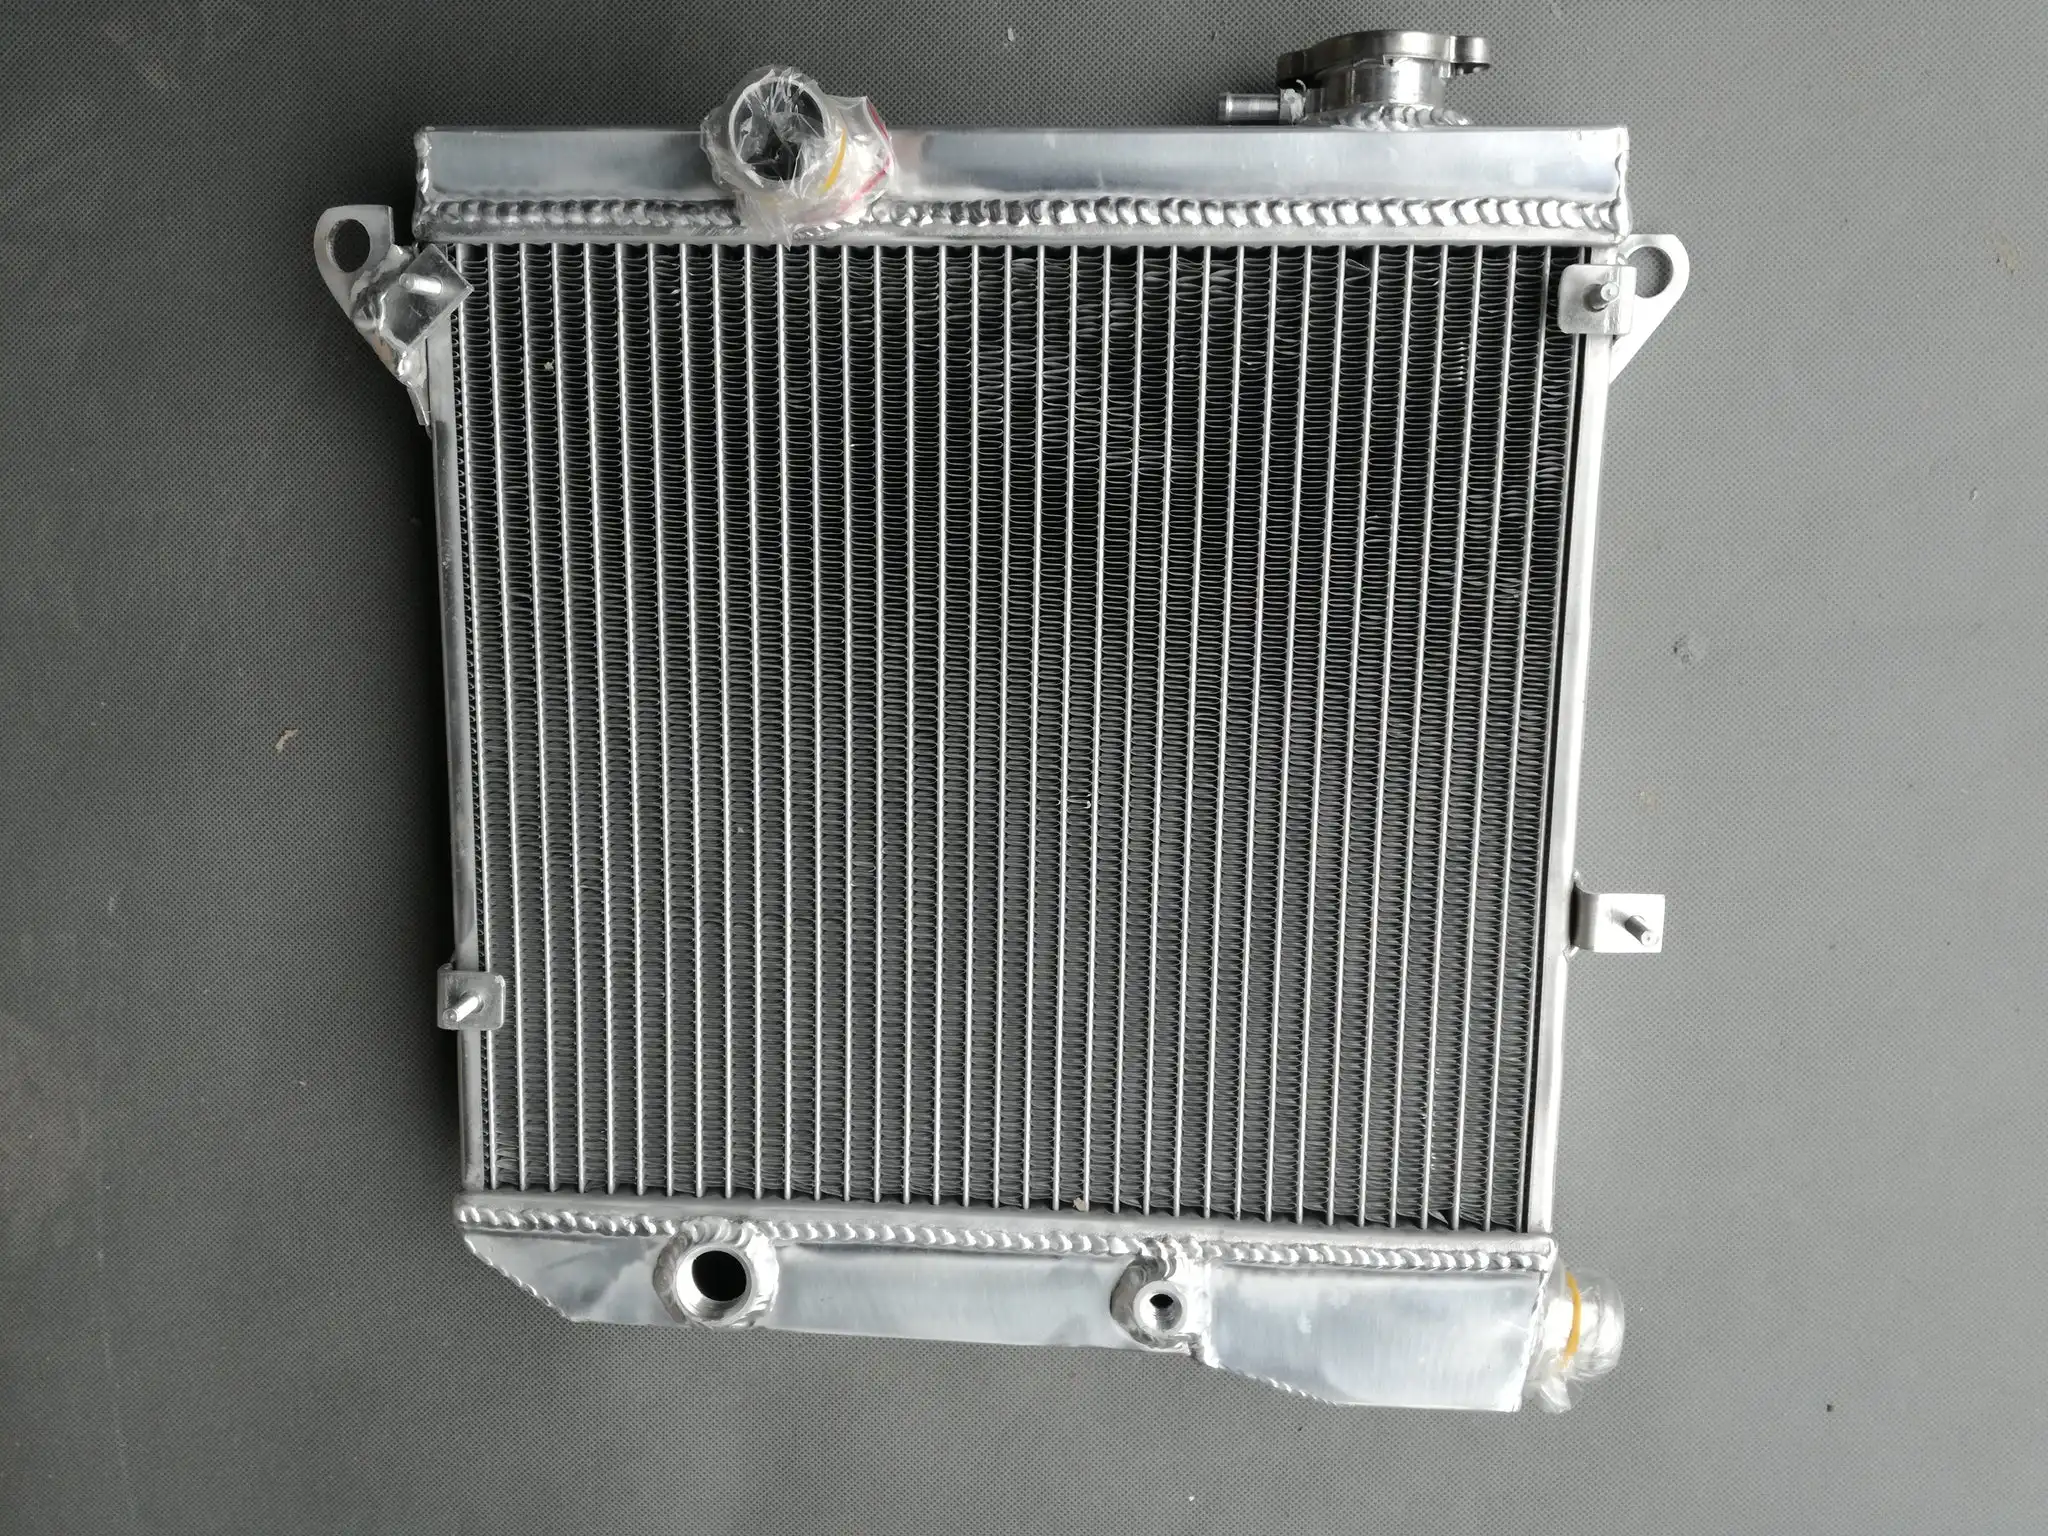 

Aluminum Radiator for Autobianchi A112 3-7 Series S4 S5 S6 1975-1985 1976 1977 1978 1979 1980 1981 1982 1983 1984